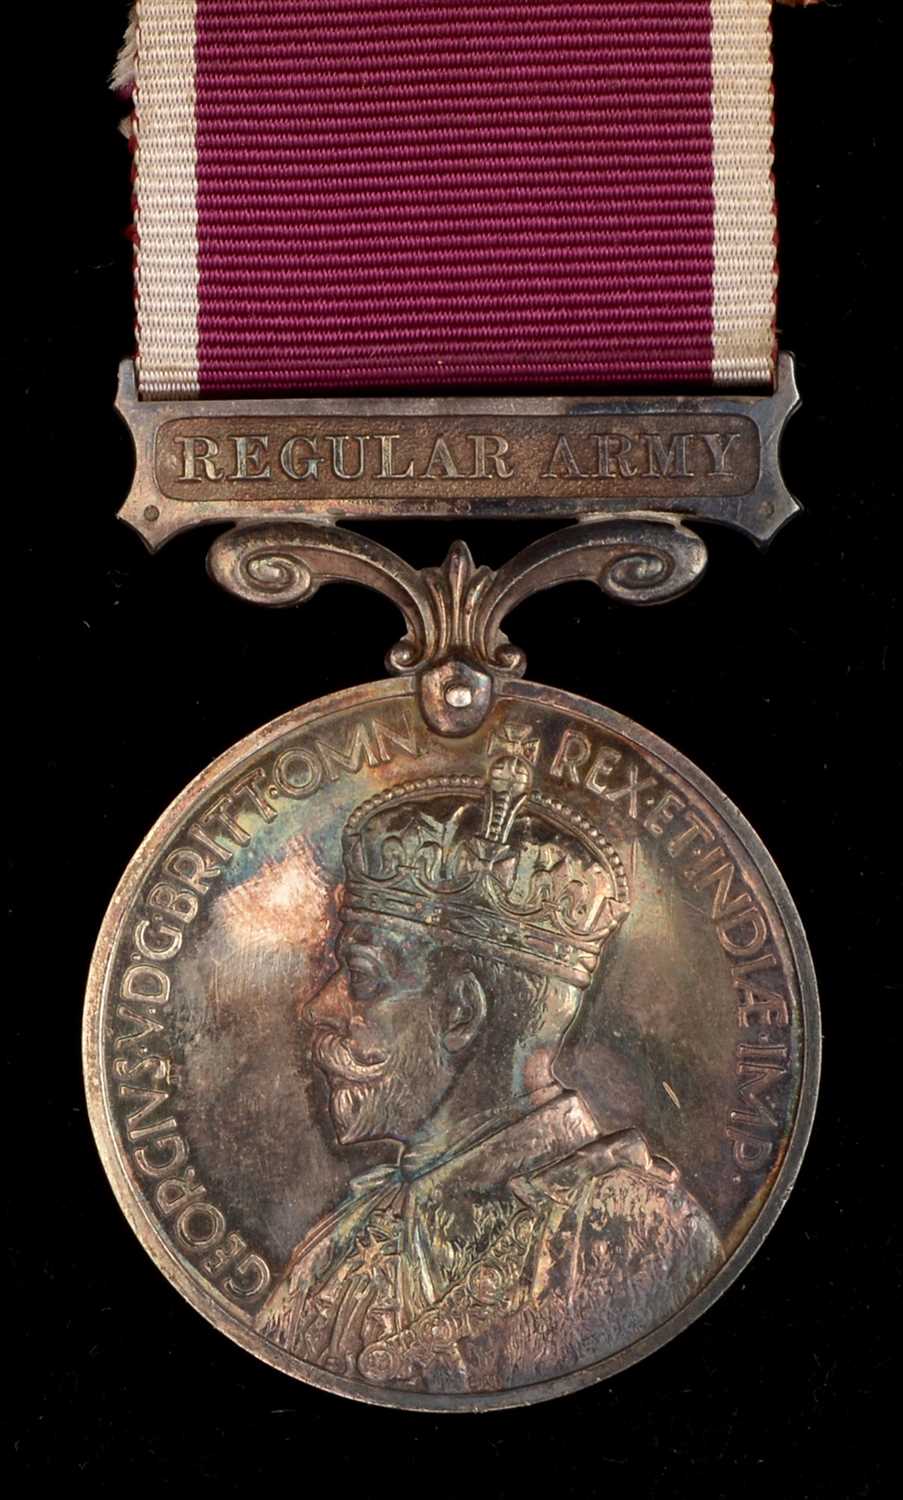 Lot 1785 - Army Long Service and Good Conduct medal